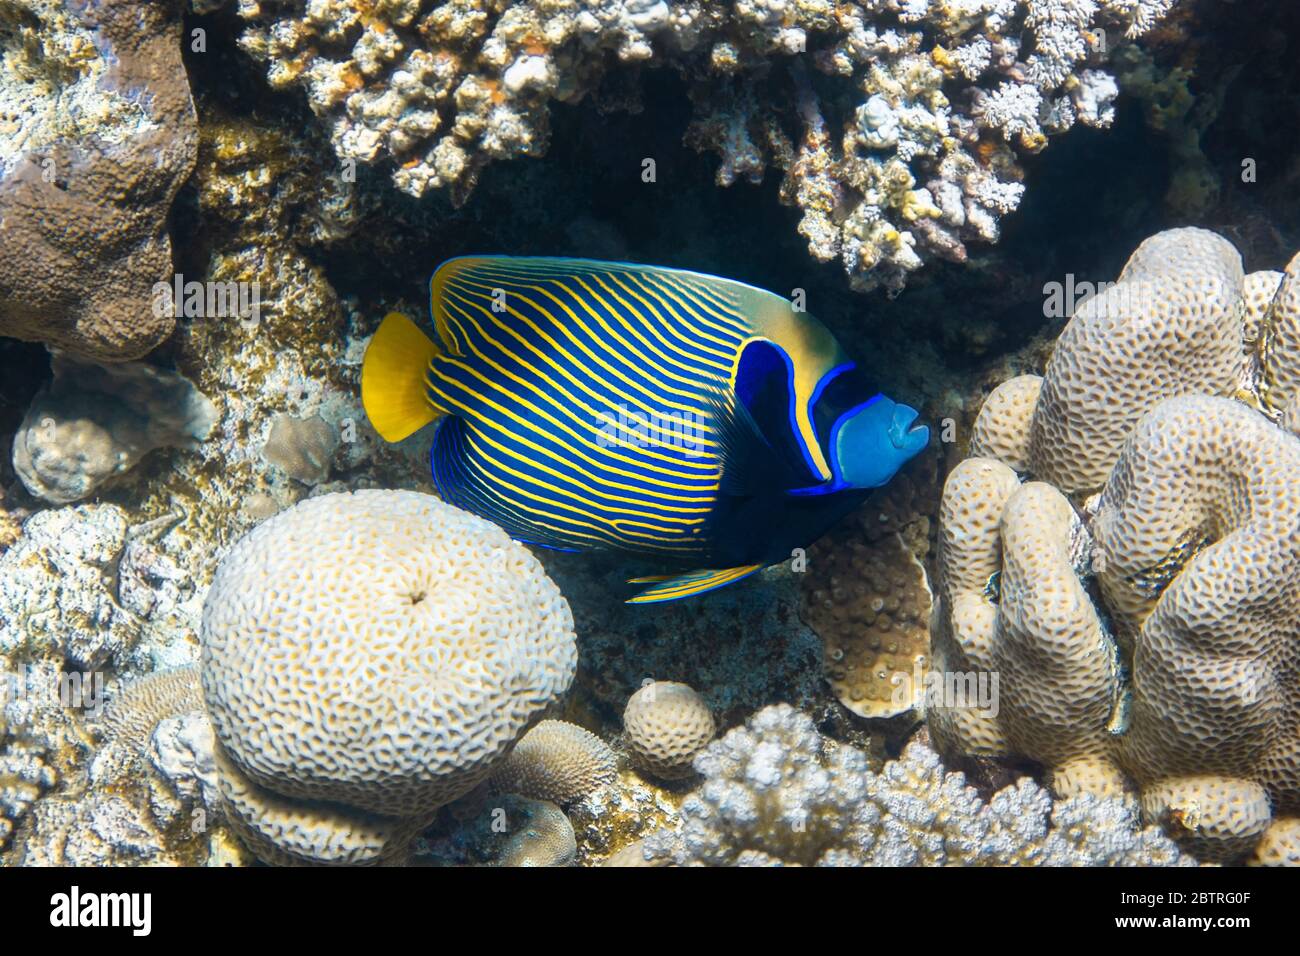 Emperor angelfish (Pomacanthus imperator) in Red Sea, Egypt. Beautiful tropical fish with colorful diagonal stripes hidden in a coral reef in a natura Stock Photo